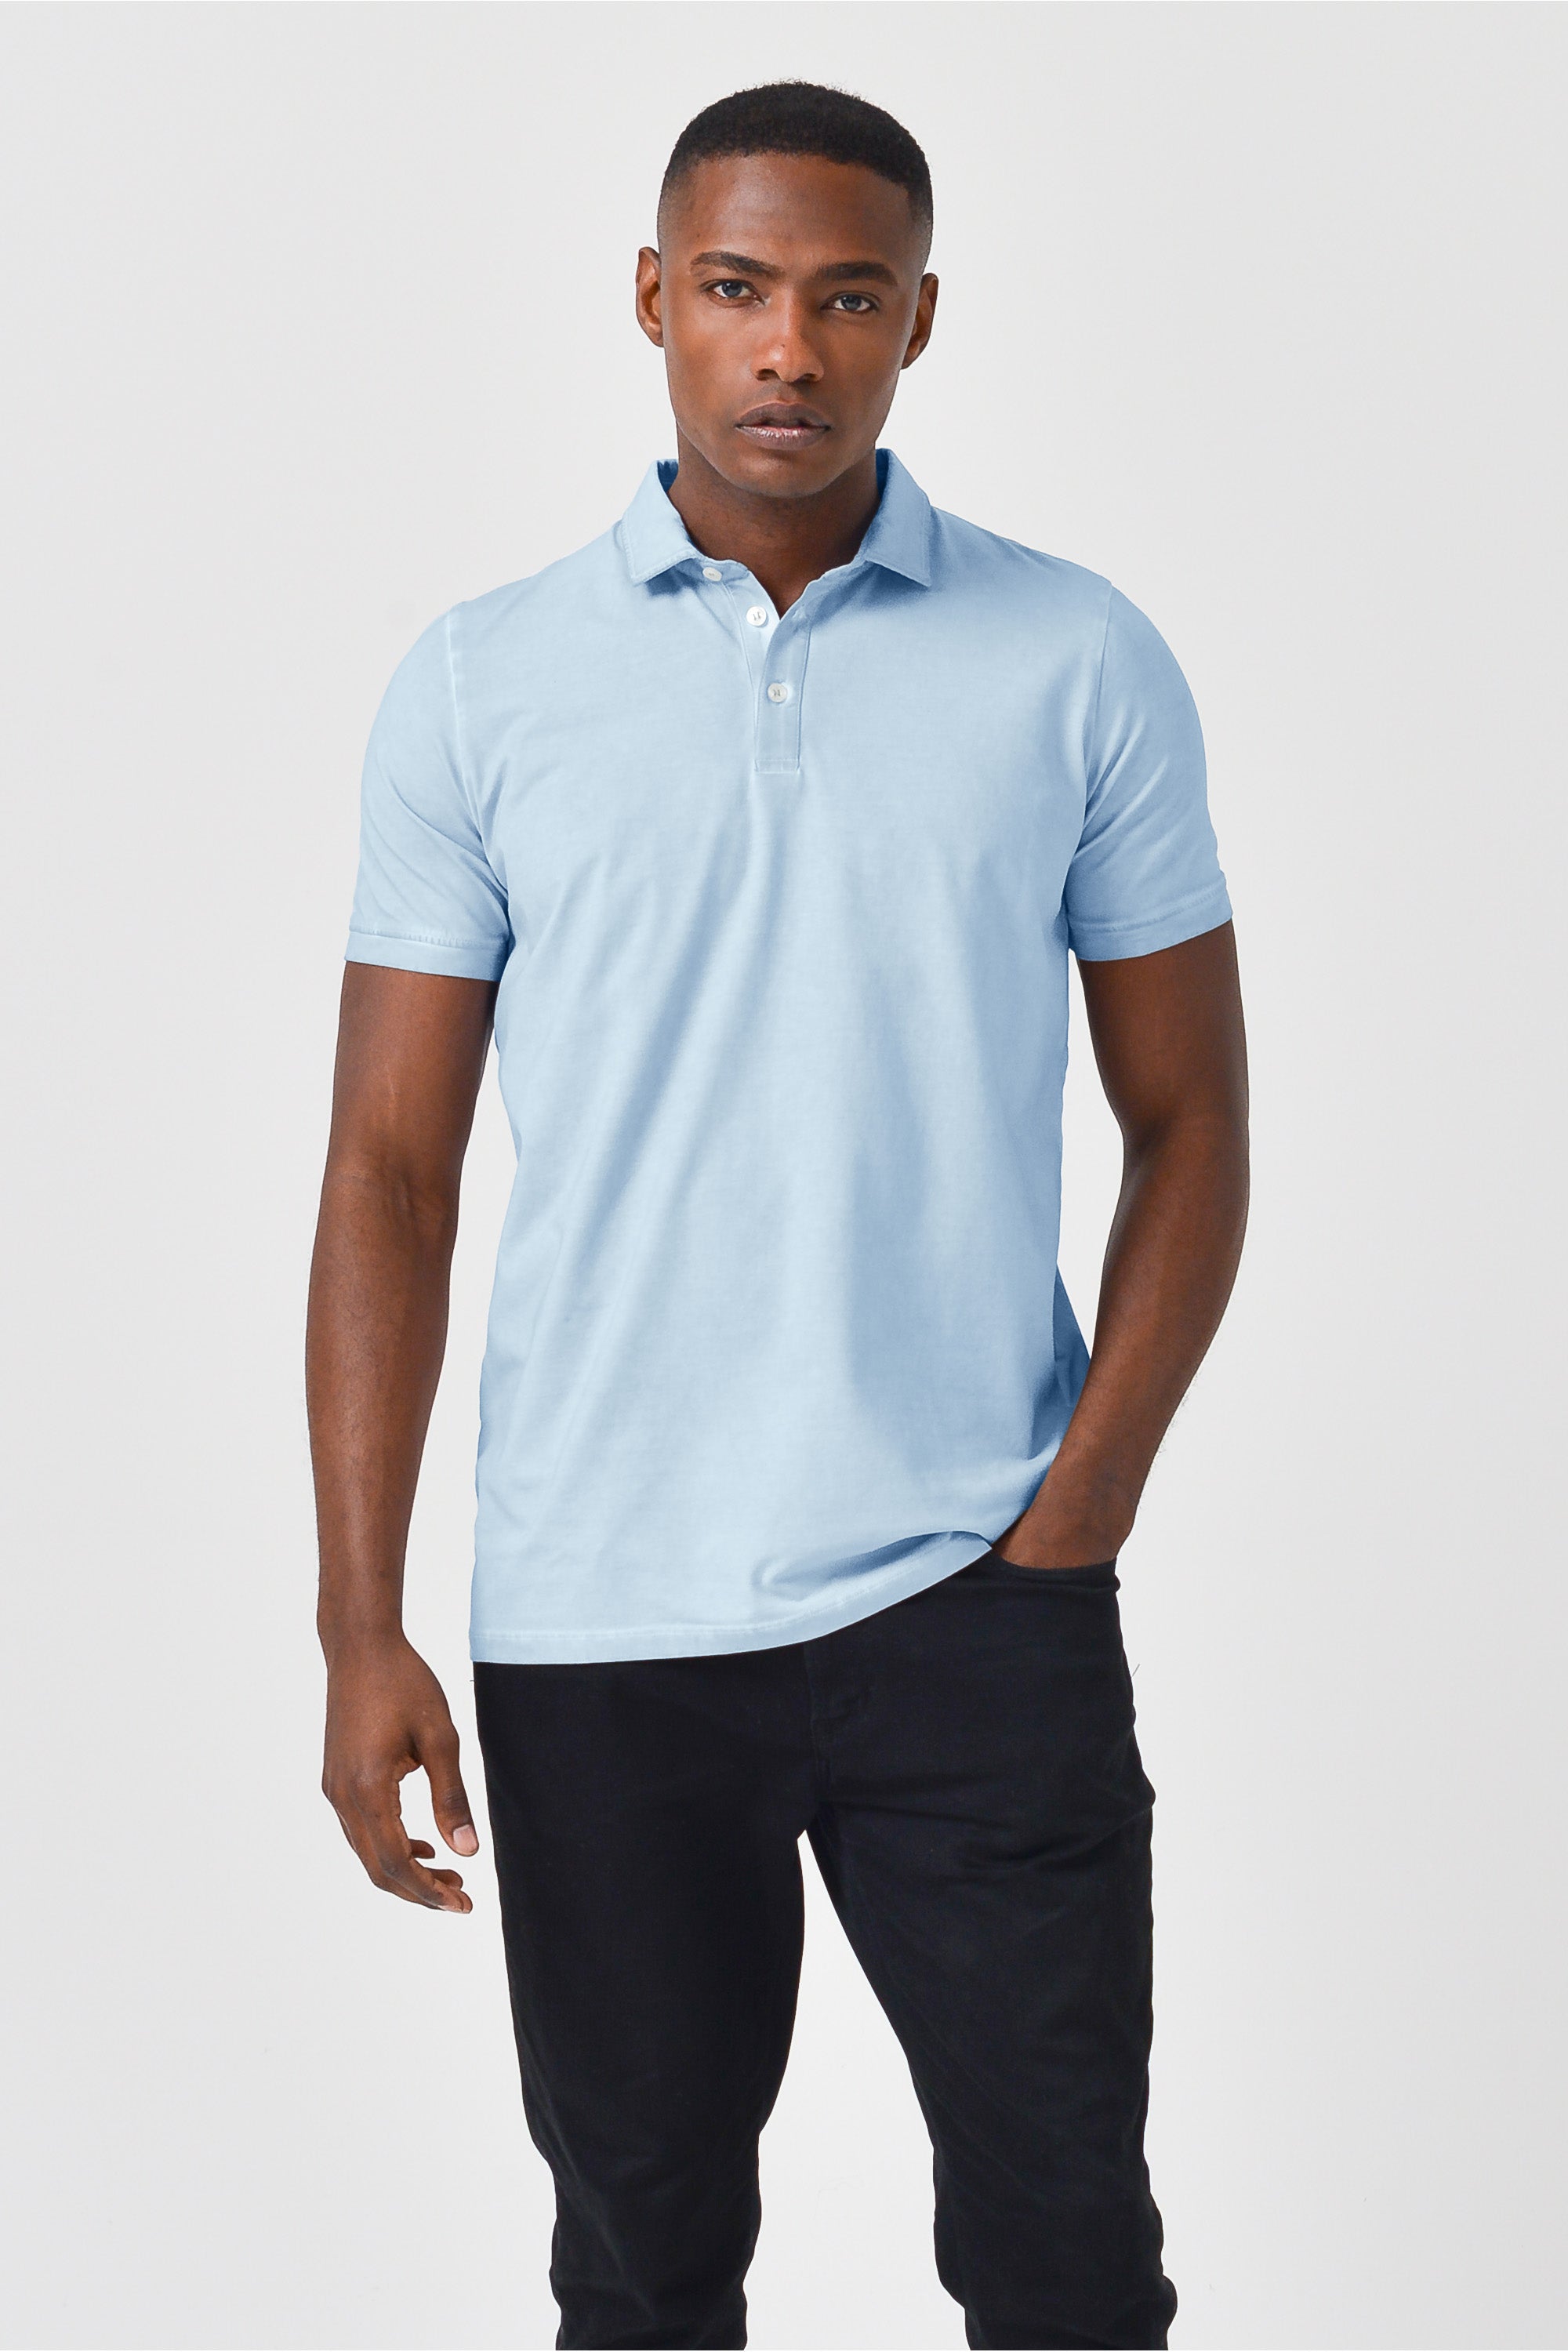 Performance Polo in Aria